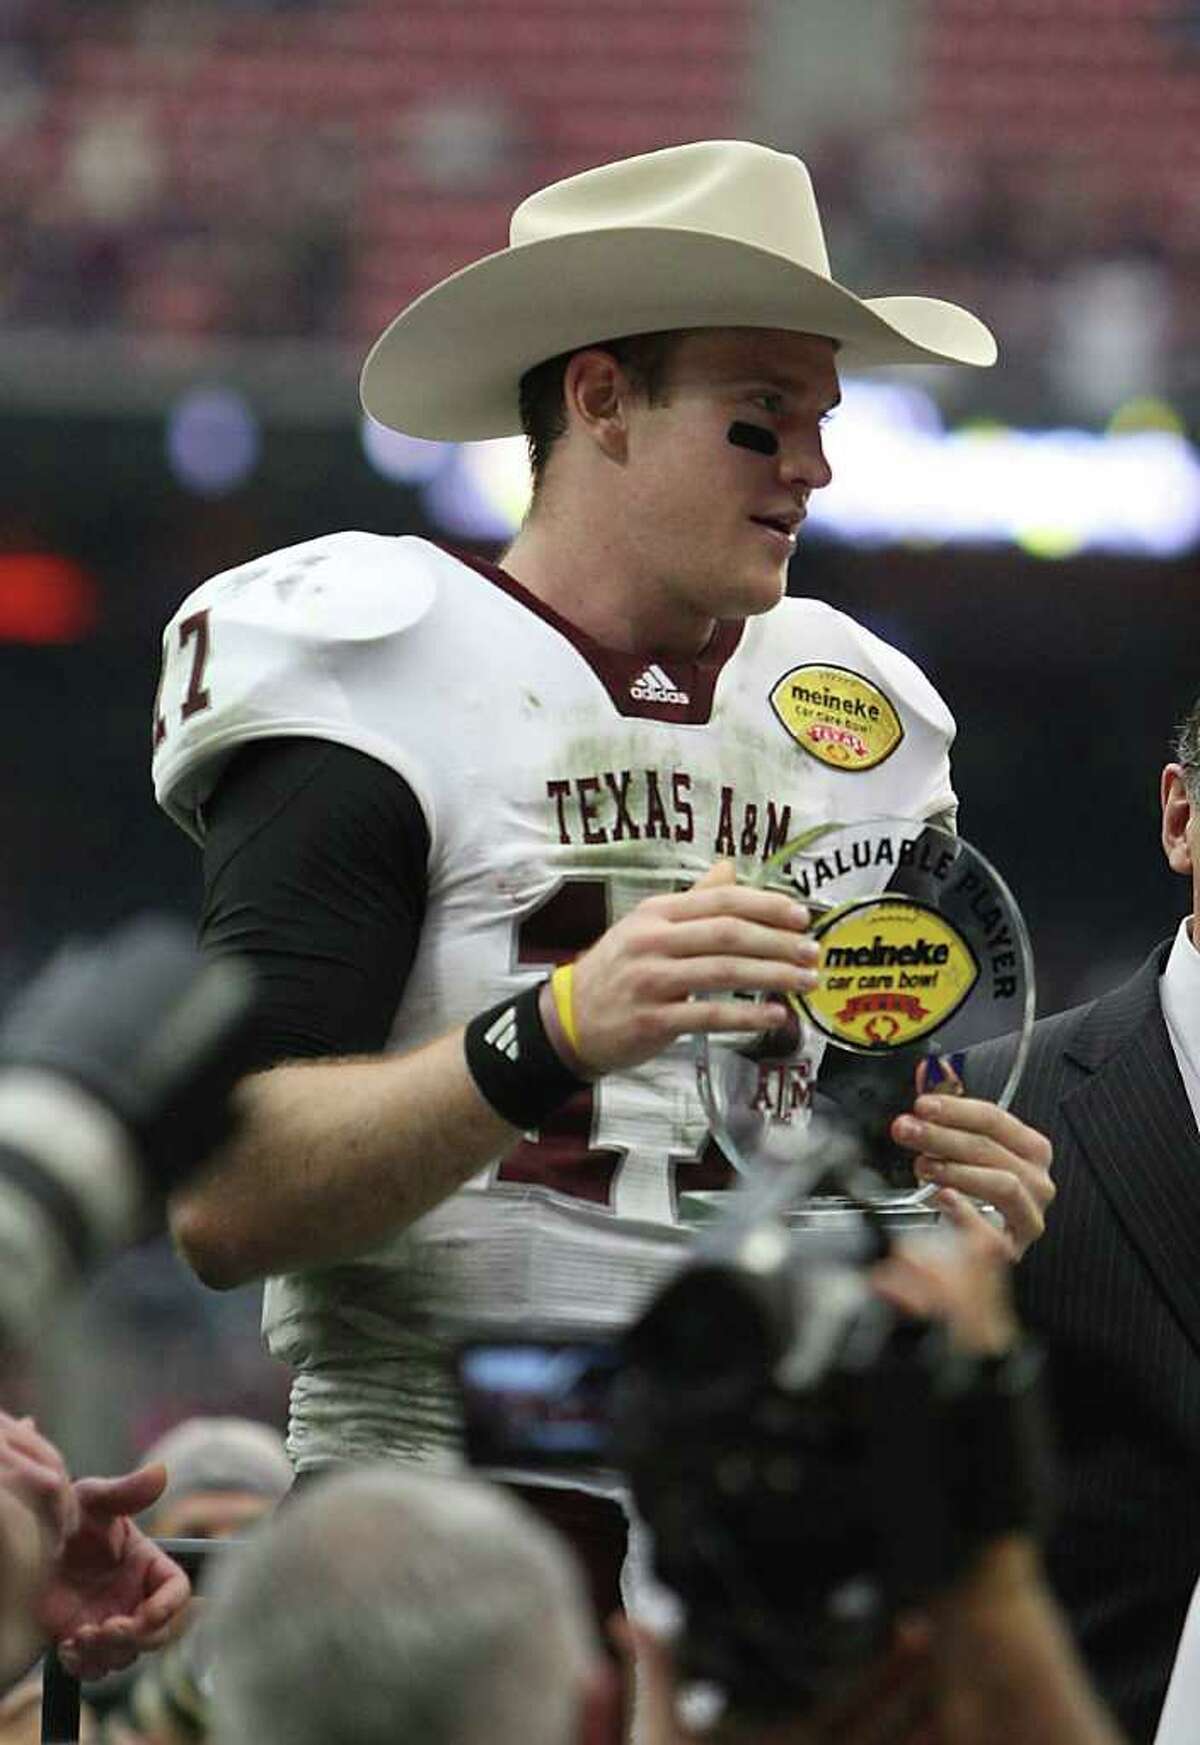 Texas A&M Aggies quarterback Ryan Tannehill (17) wears a cowboy hat as he holds the MVP trophy after the Meineke Car Care Bowl at Reliant Stadium,Saturday, Dec. 31, 2011, in Houston. Texas A&M won the game against Northwestern University 33-22.